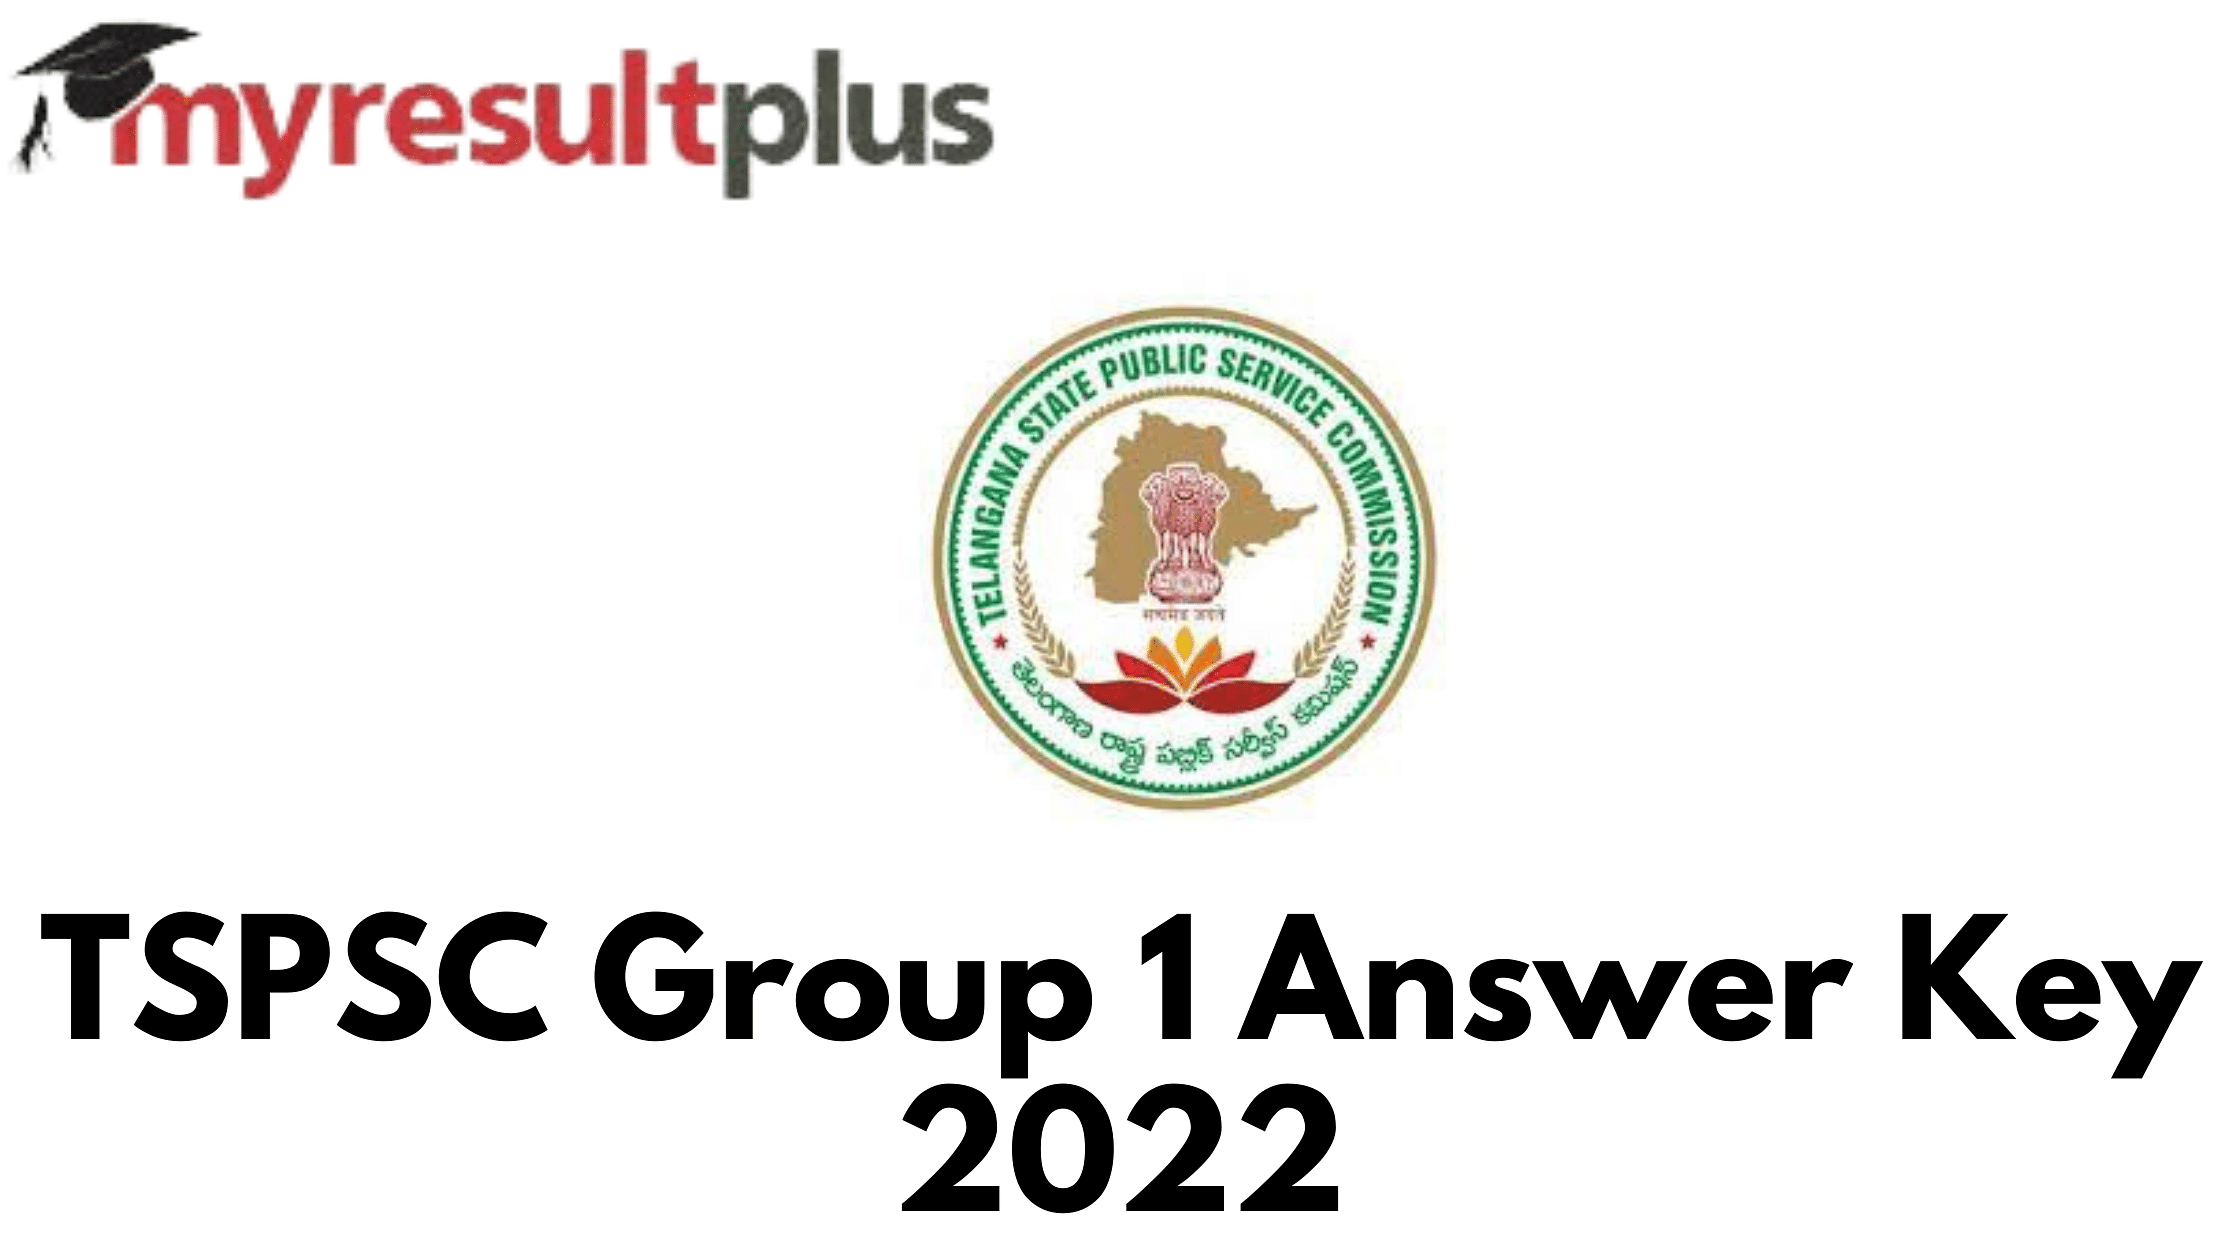 tspsc-group-1-answer-key-2022-released-direct-link-to-download-here-jobs